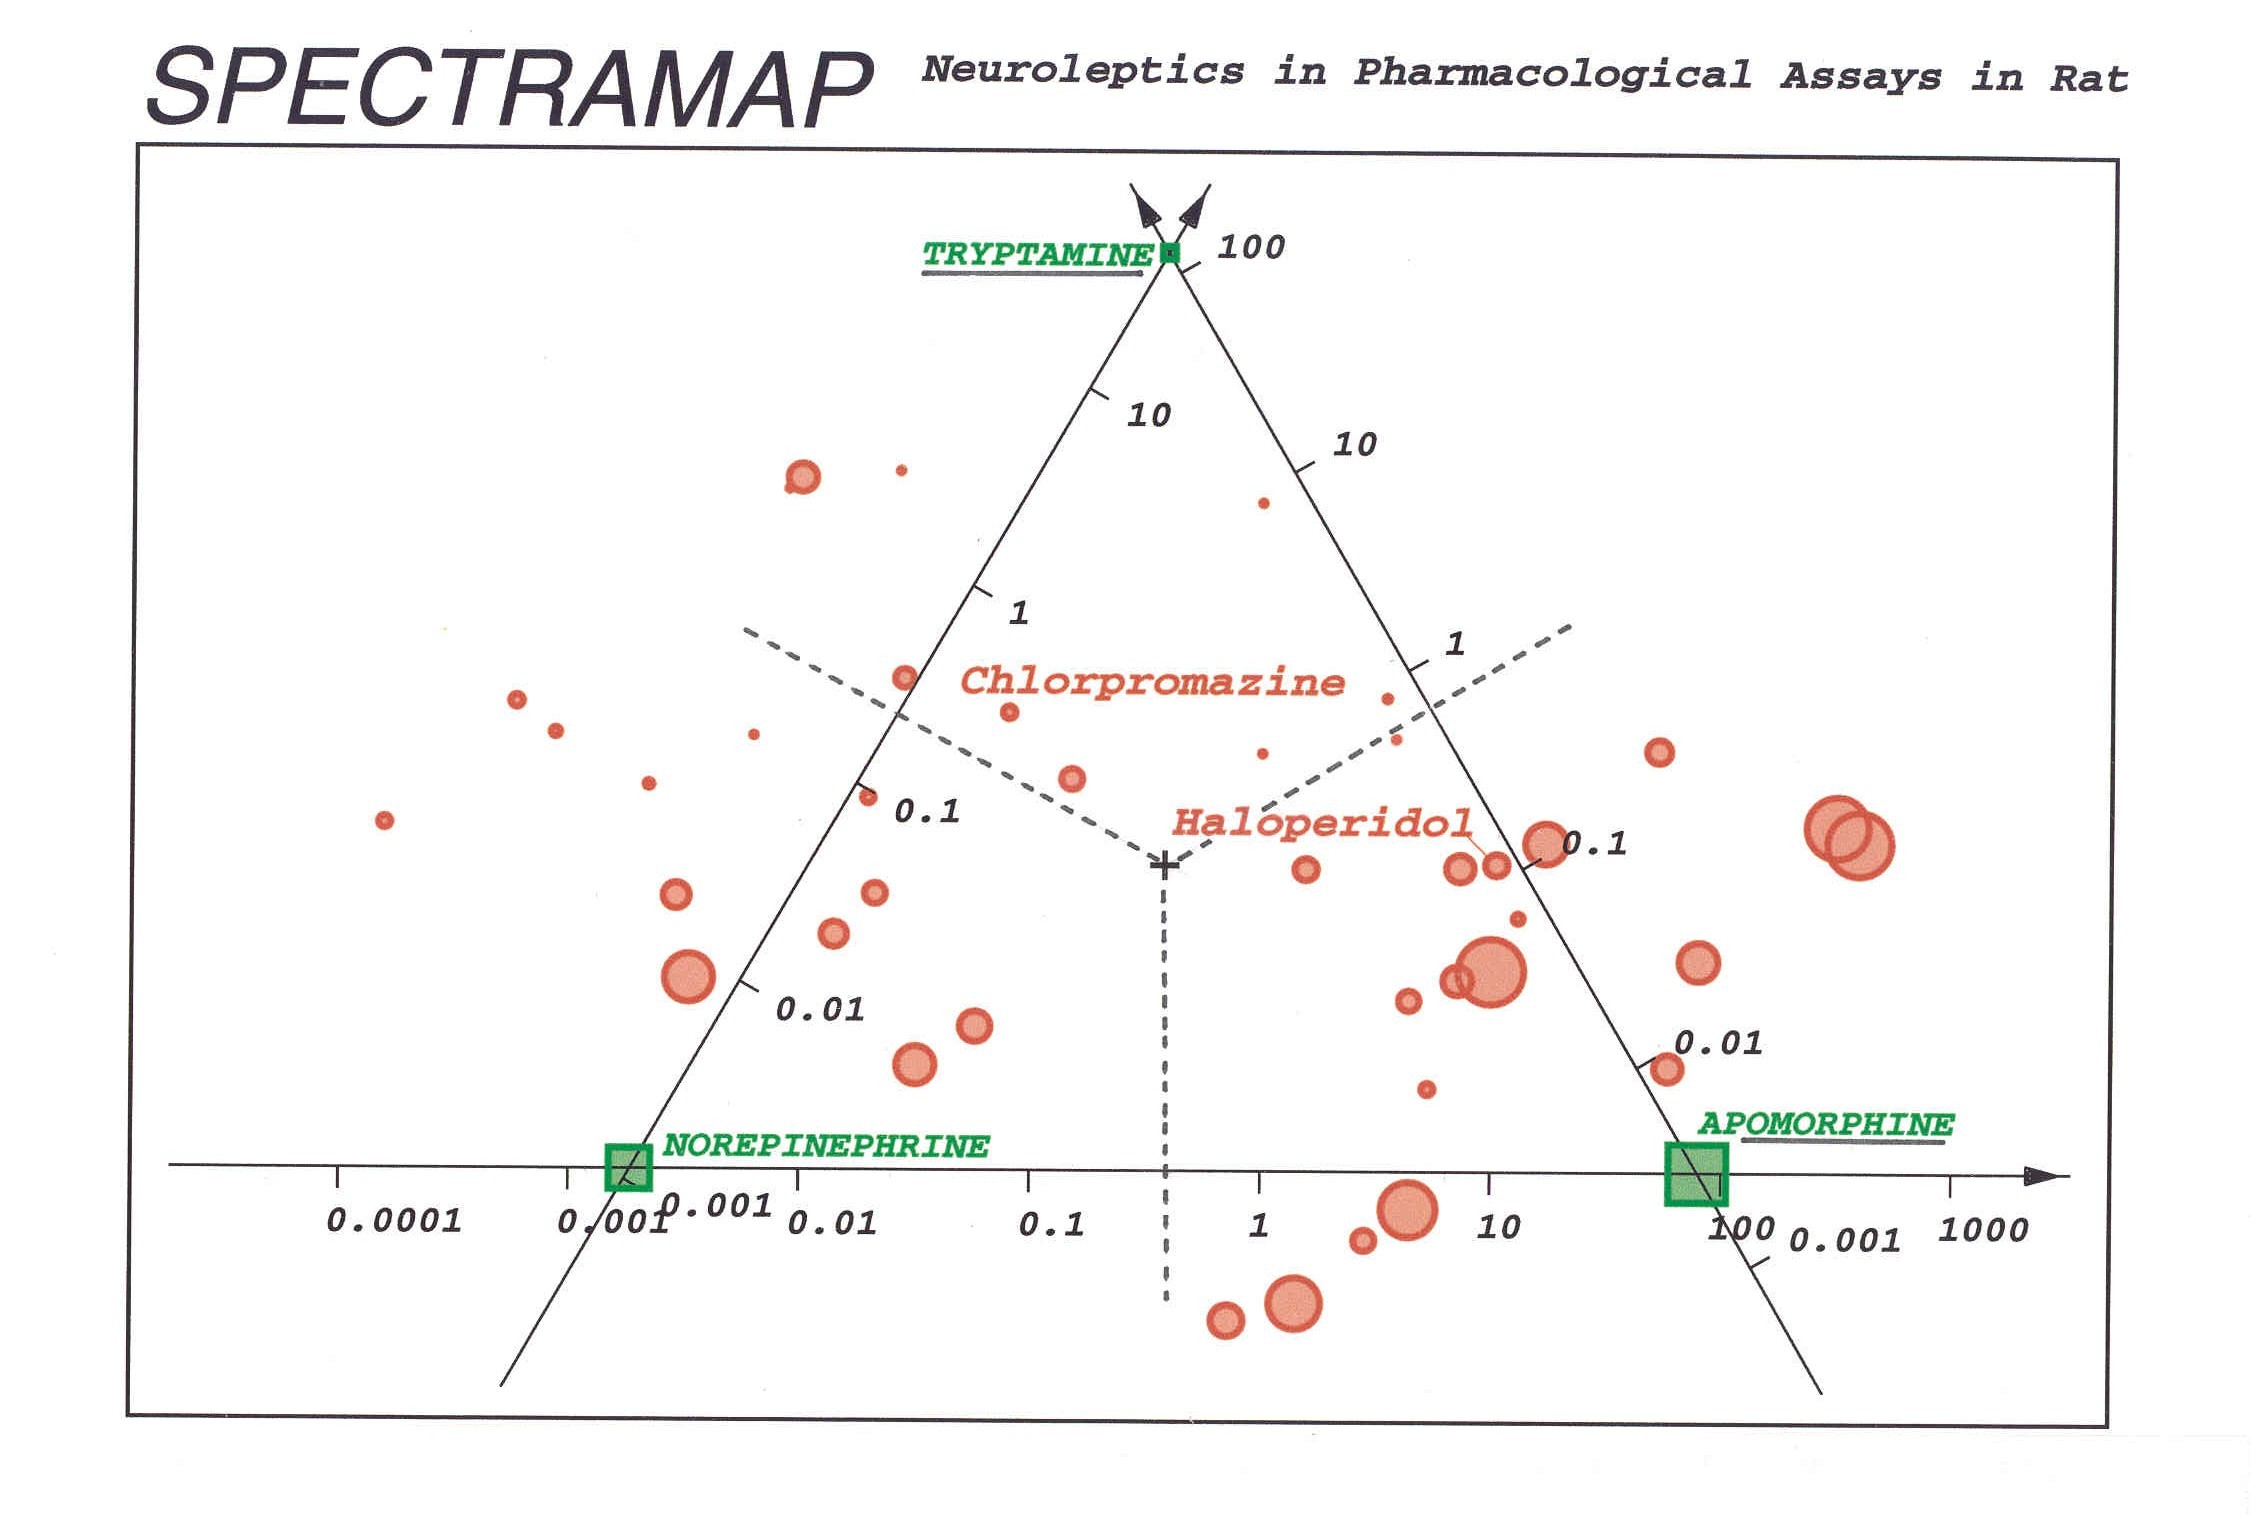 Spectral map of 45 neuroleptic or antipsychotic compounds and 3 selected tests in rat, based on the pharmacological spectra from Paul Janssen, Arzneim. Forschung (Drug Design), 1965. (Spectramap is a trademark of Coloritto BV)